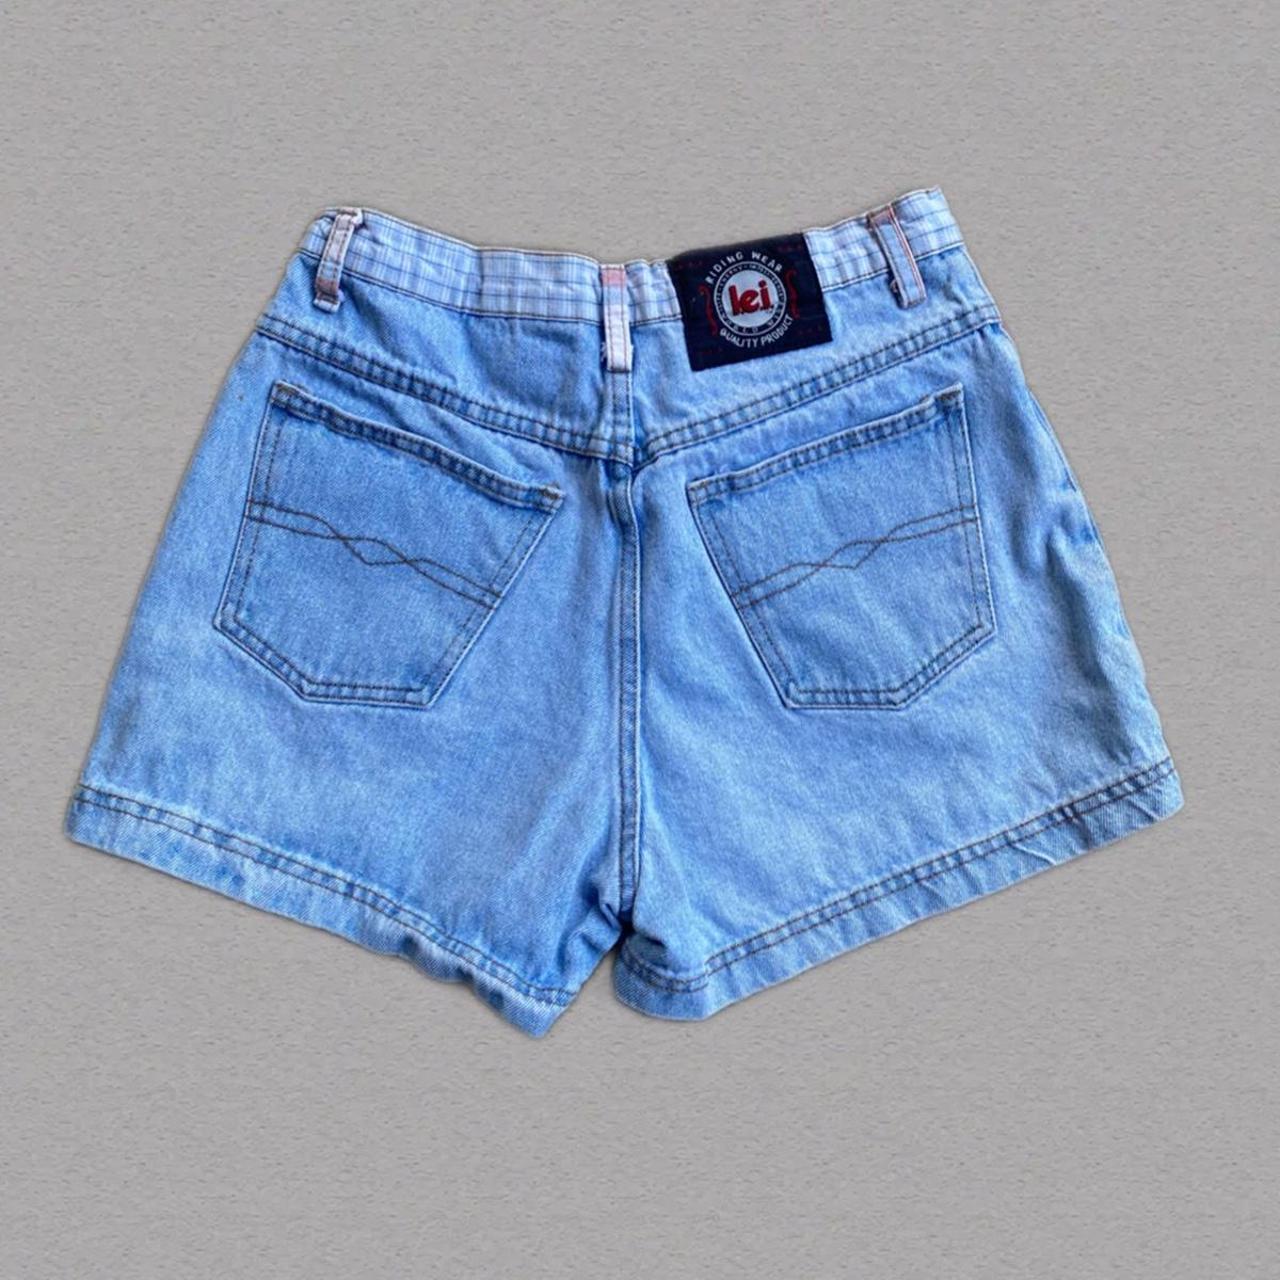 L.e.i. Women's Red and Blue Shorts (2)